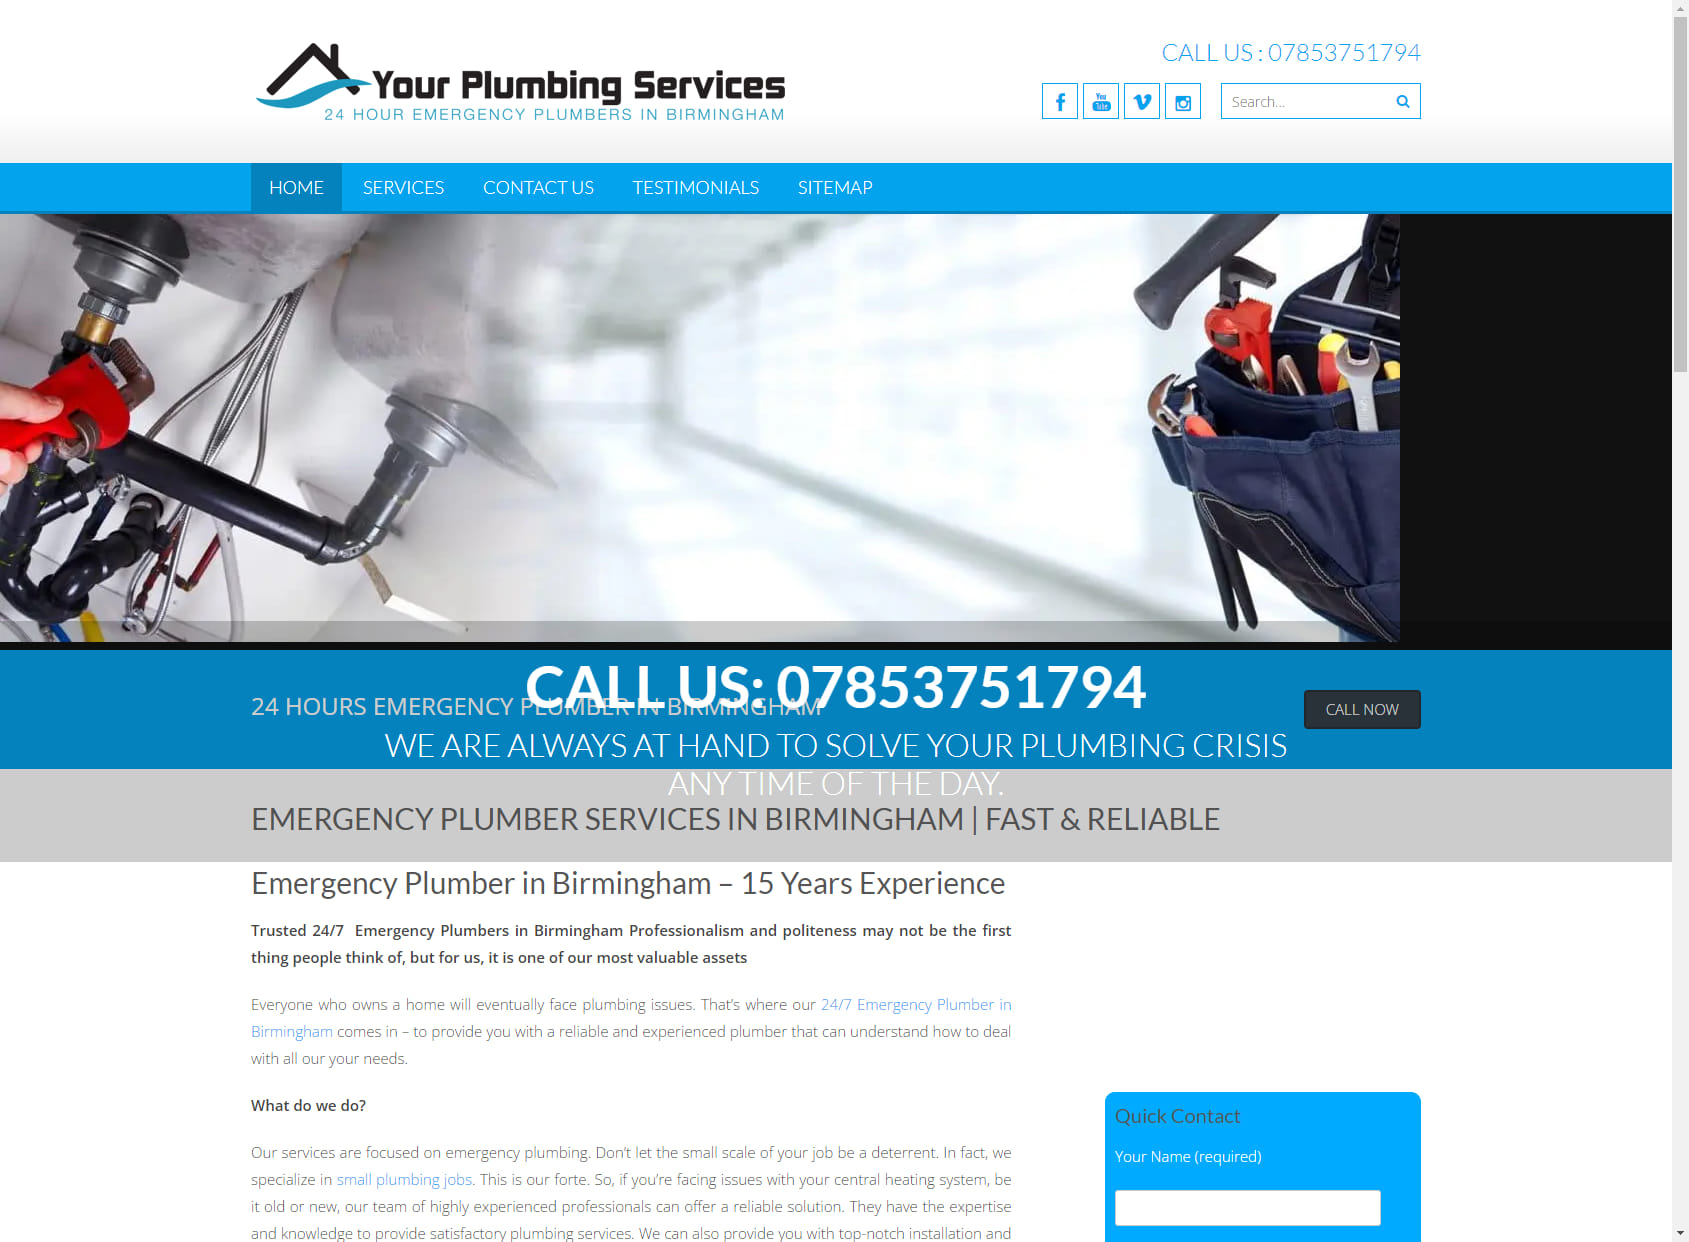 Your plumbing services